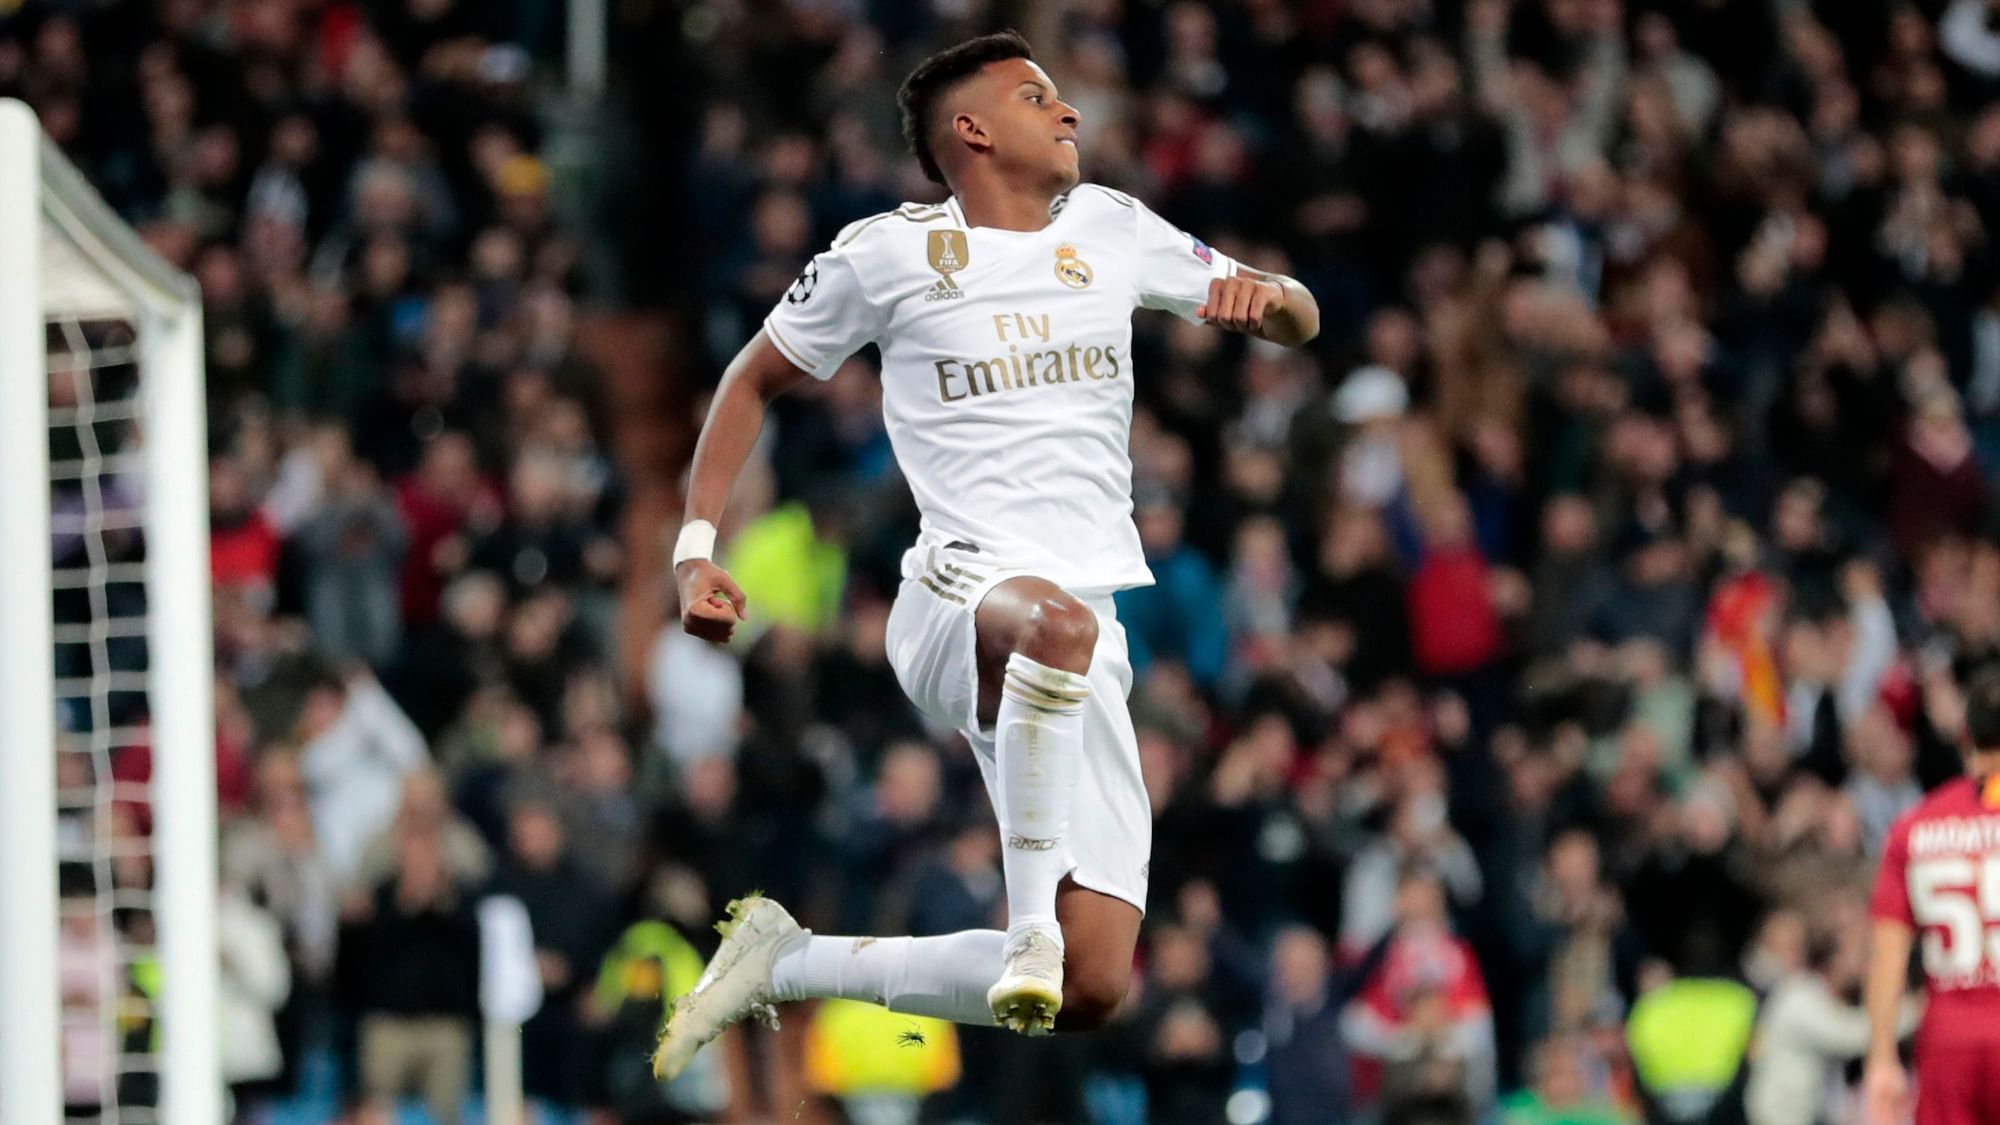 Real Madrid’s 18-year-old sensation Rodrygo netted a hattrick in his team’s 6-0 rout of Galatasaray